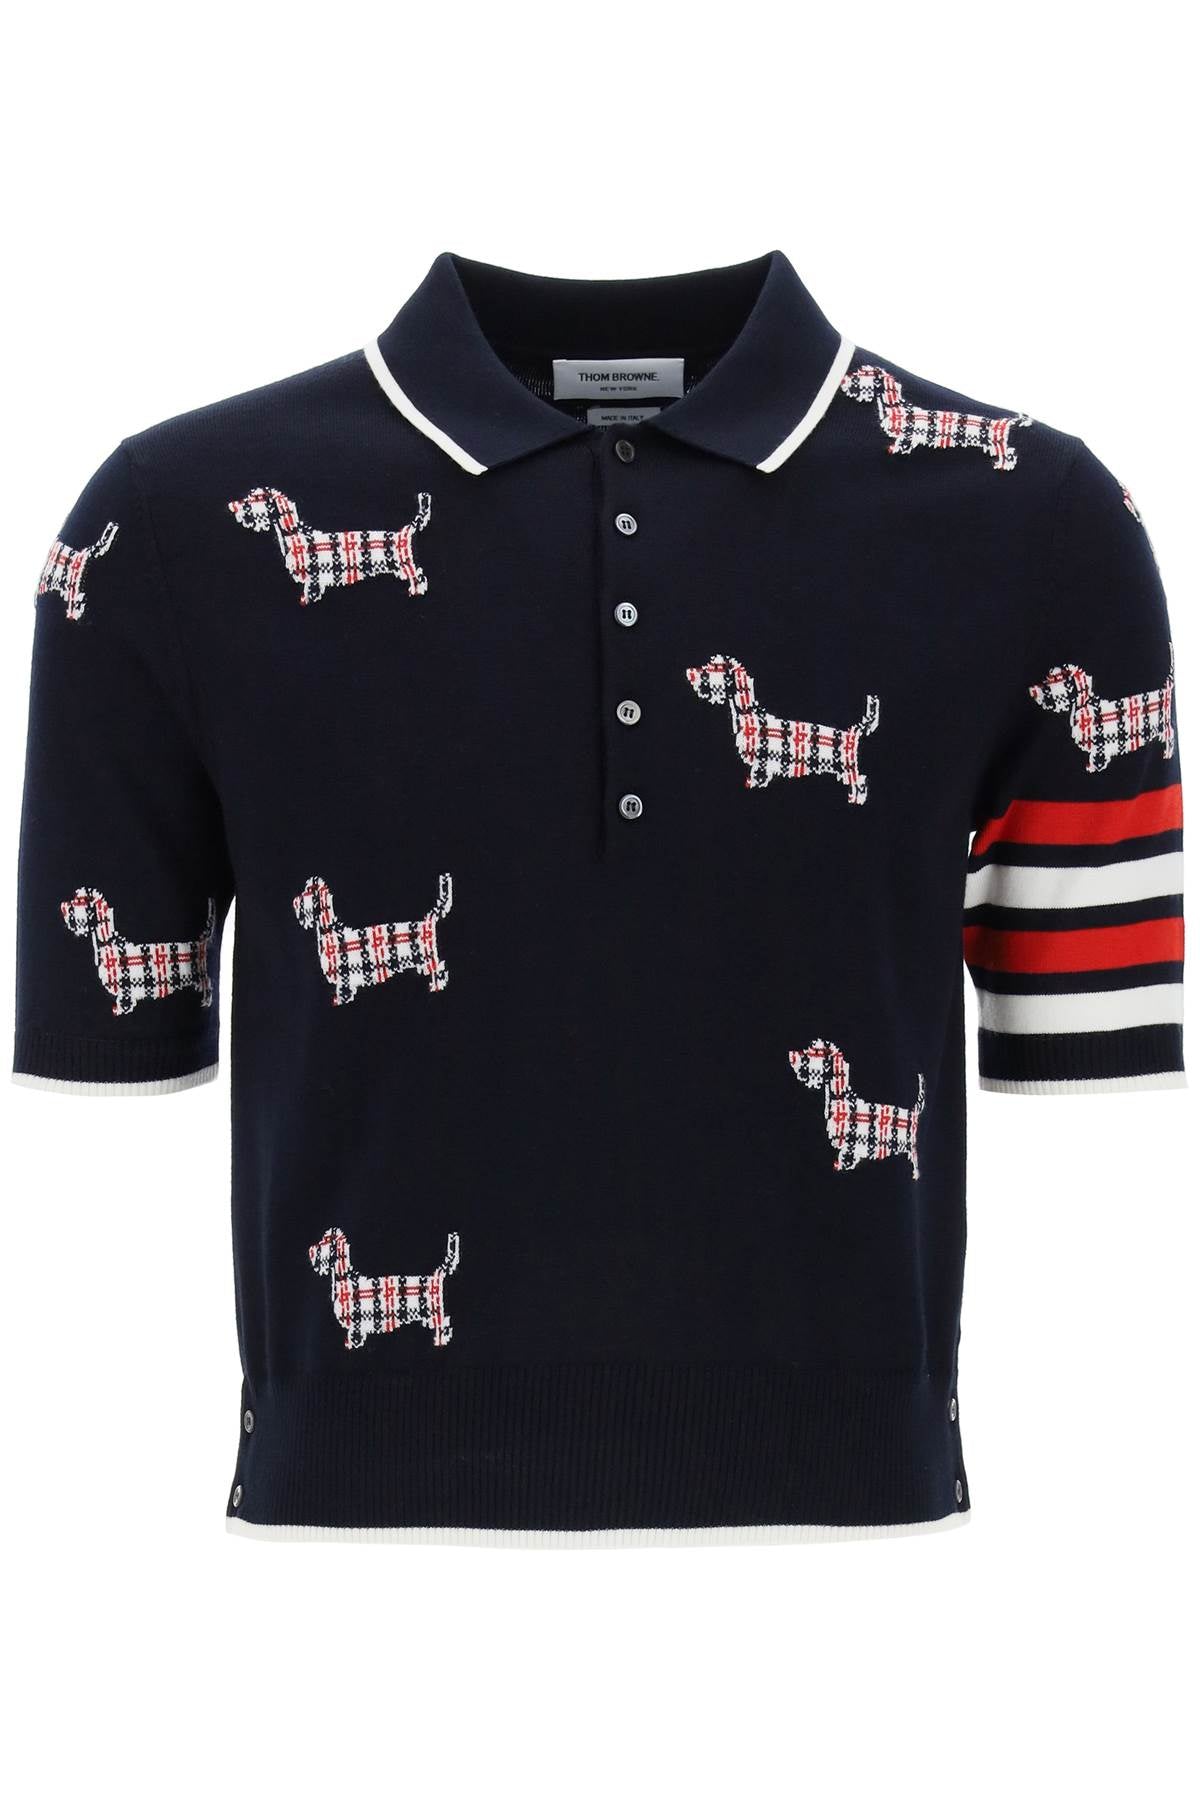 Thom browne hector knitted polo shirt-0